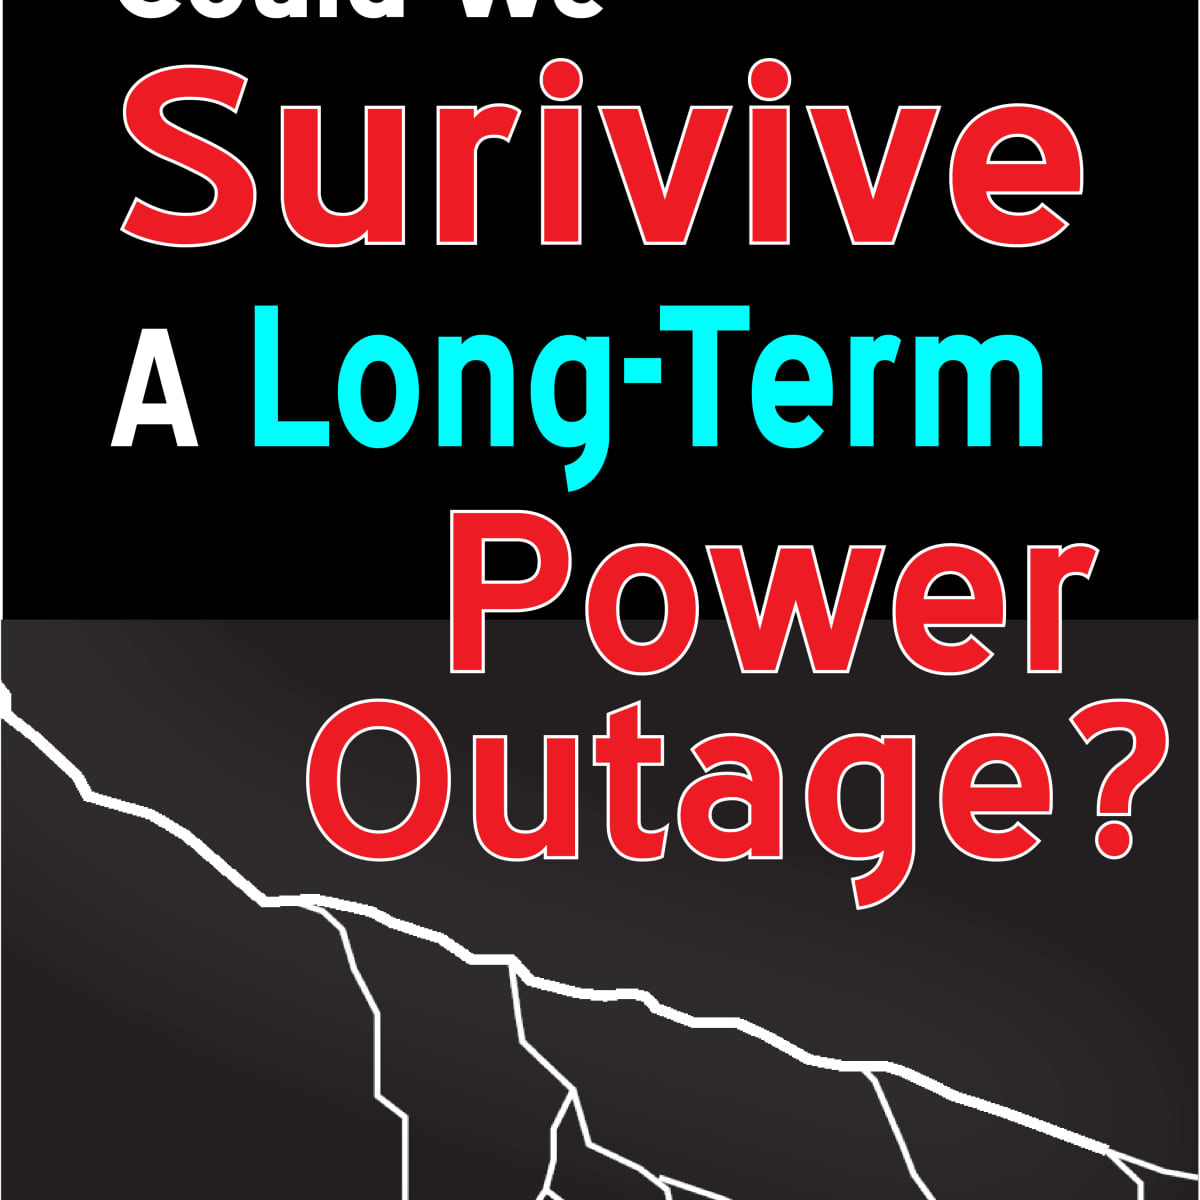 Could We Survive a Long-Term Power Outage? - Owlcation